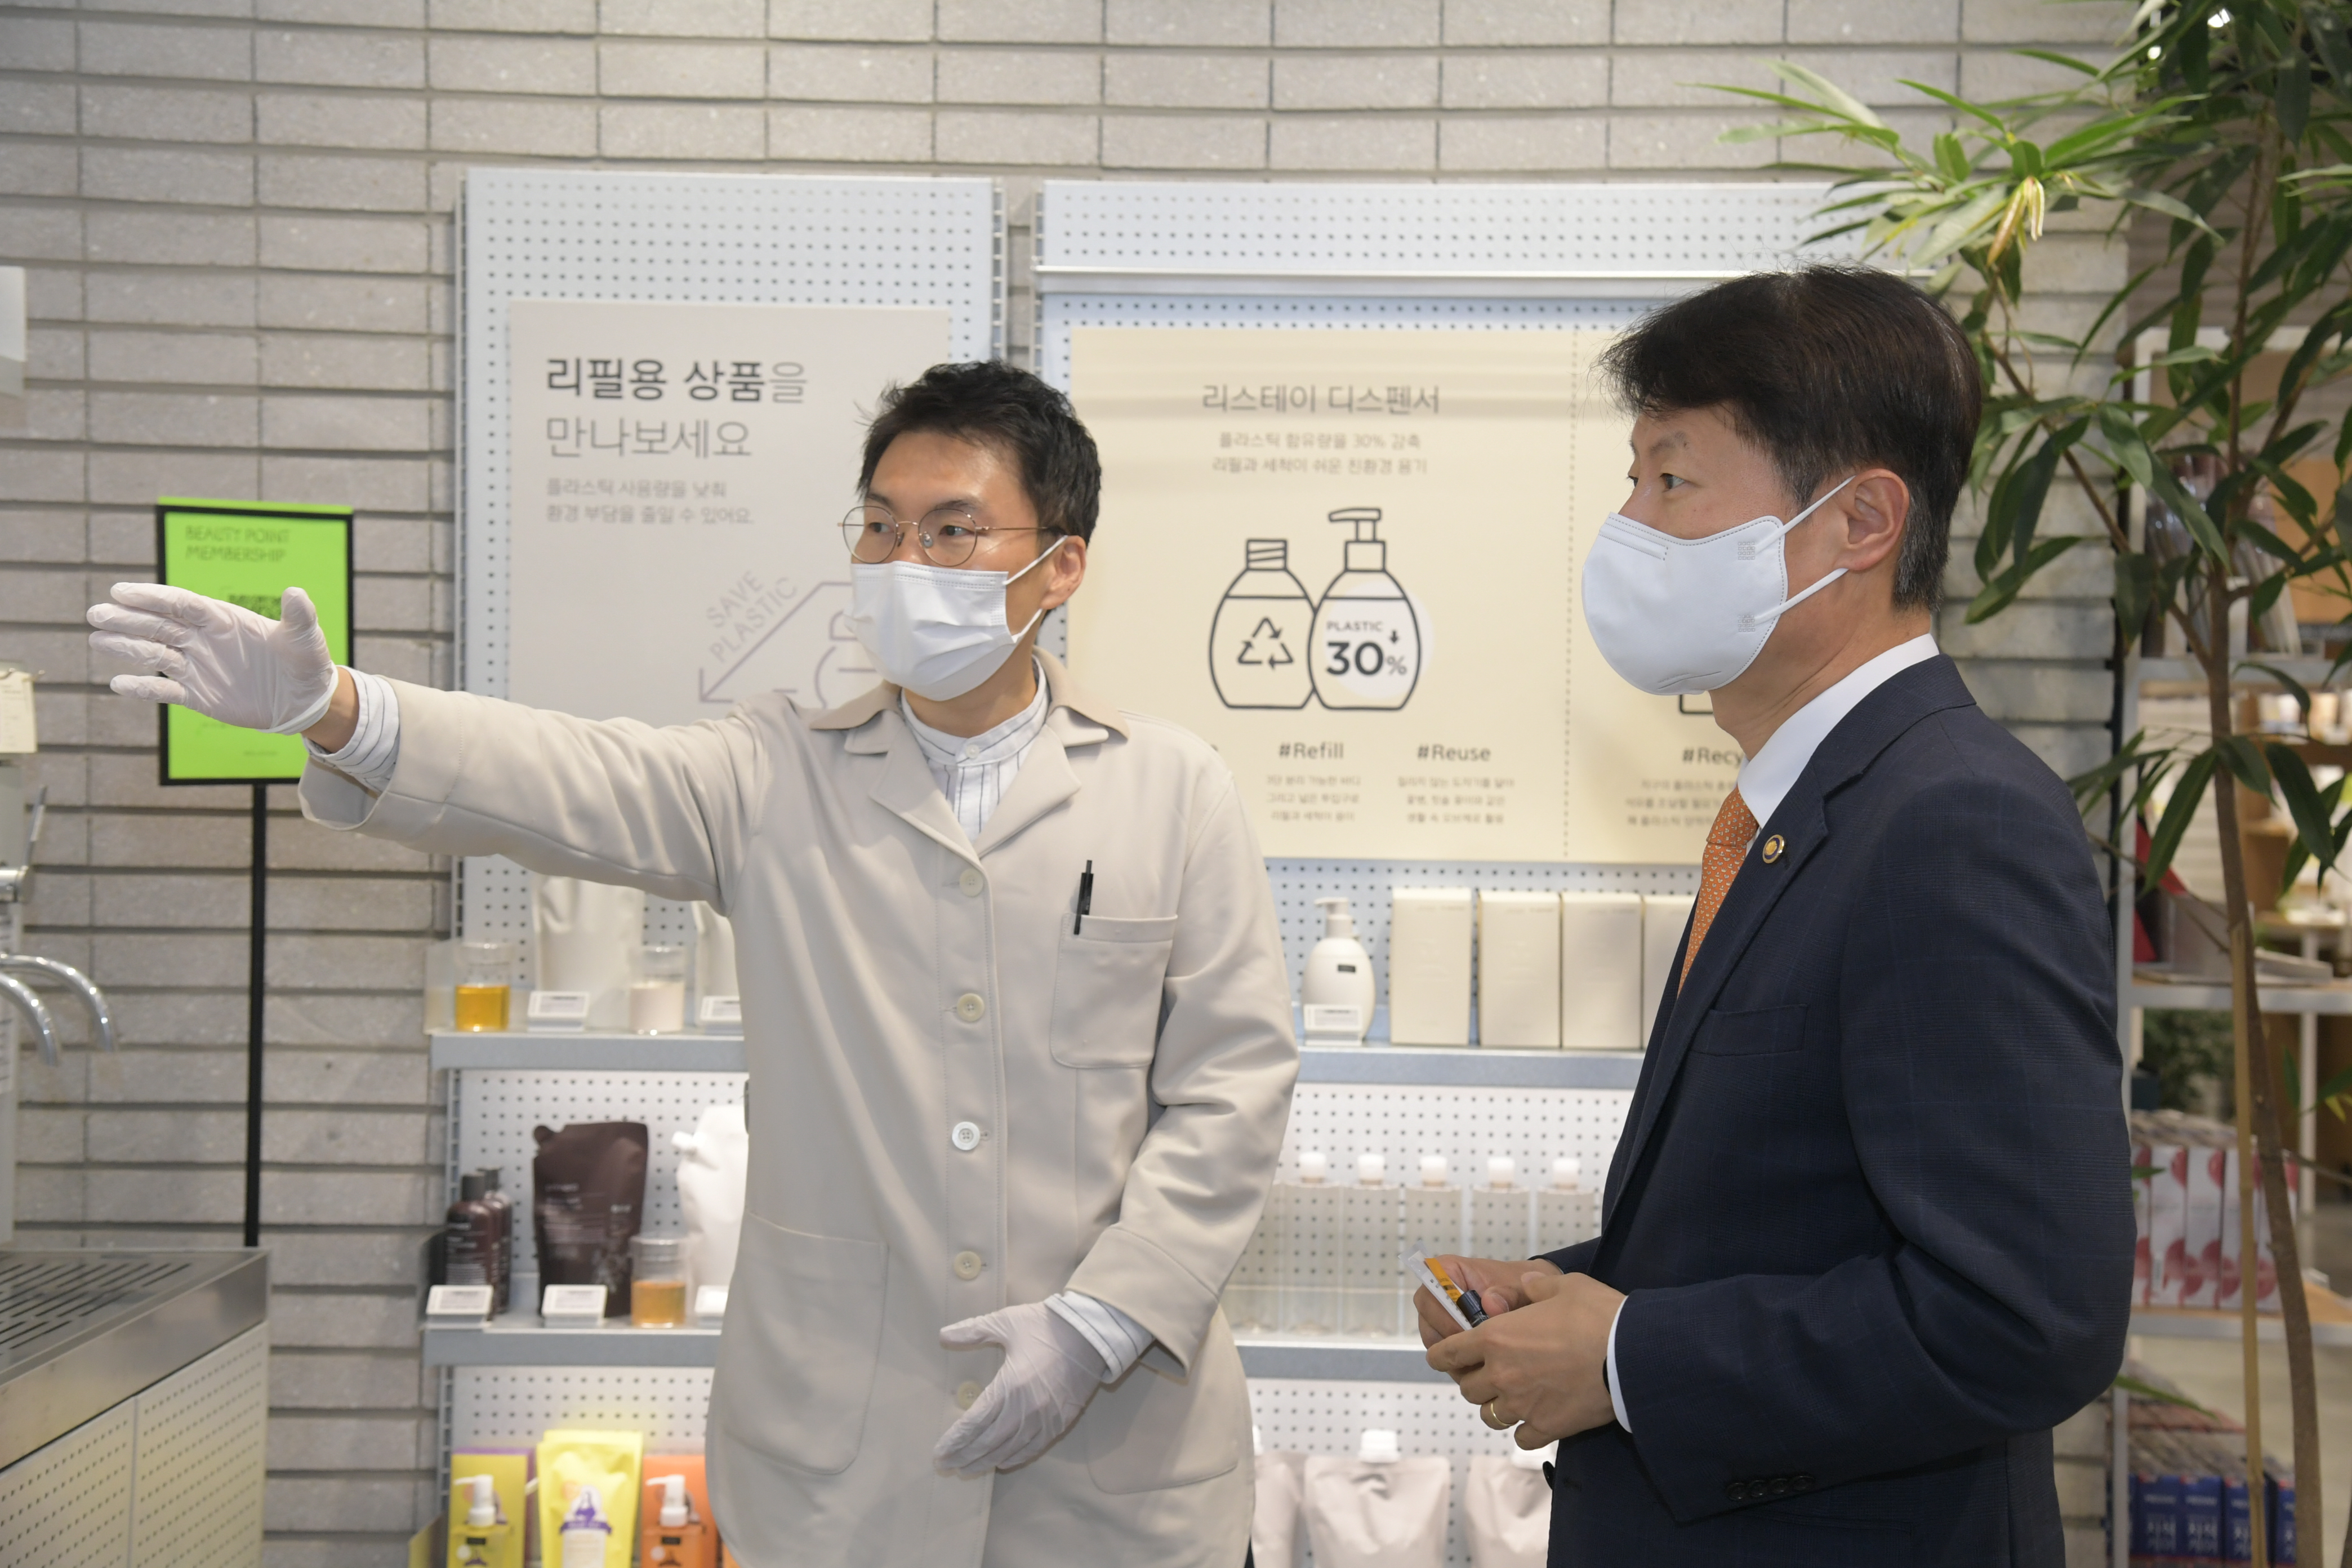 Photo News3 - [May 28, 2021] Minister visits sales site of cosmetics sold in small portions